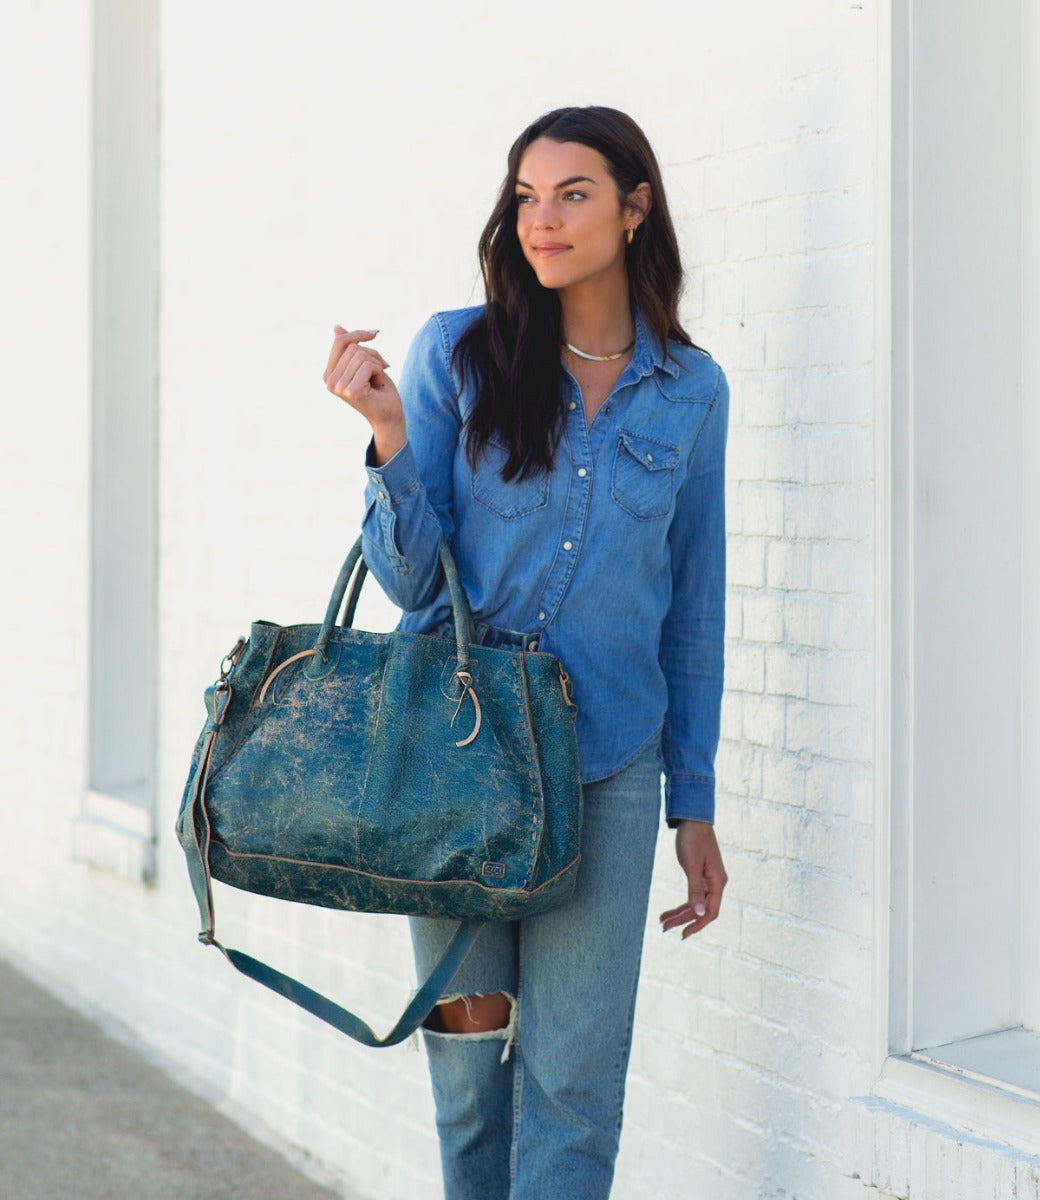 A woman in a blue shirt and jeans holding a Bed Stu Rockaway tote bag.